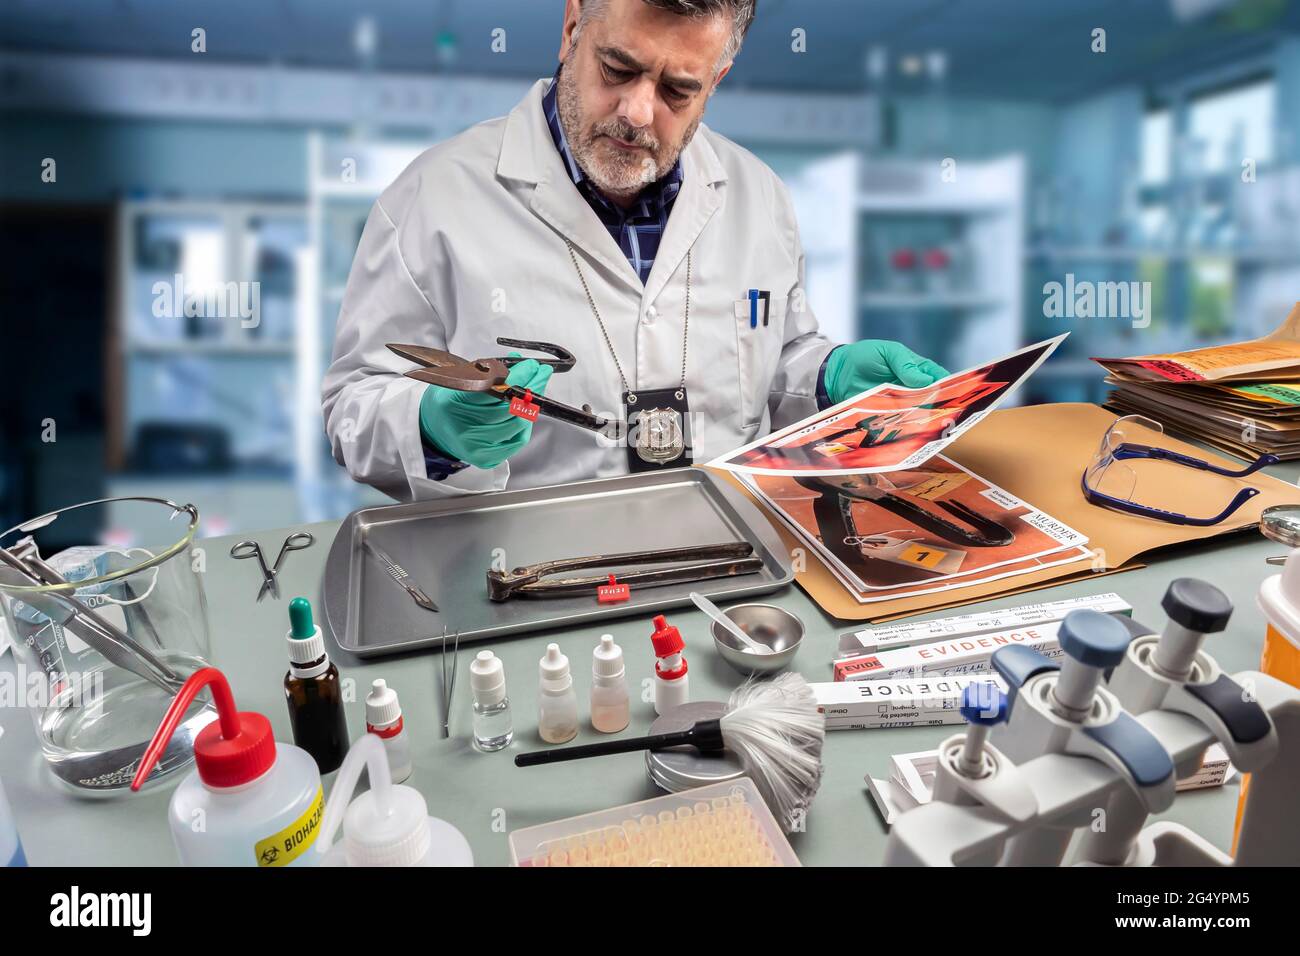 Police scientist extracts DNA sample from a pair of pliers in a crime lab, concept image Stock Photo